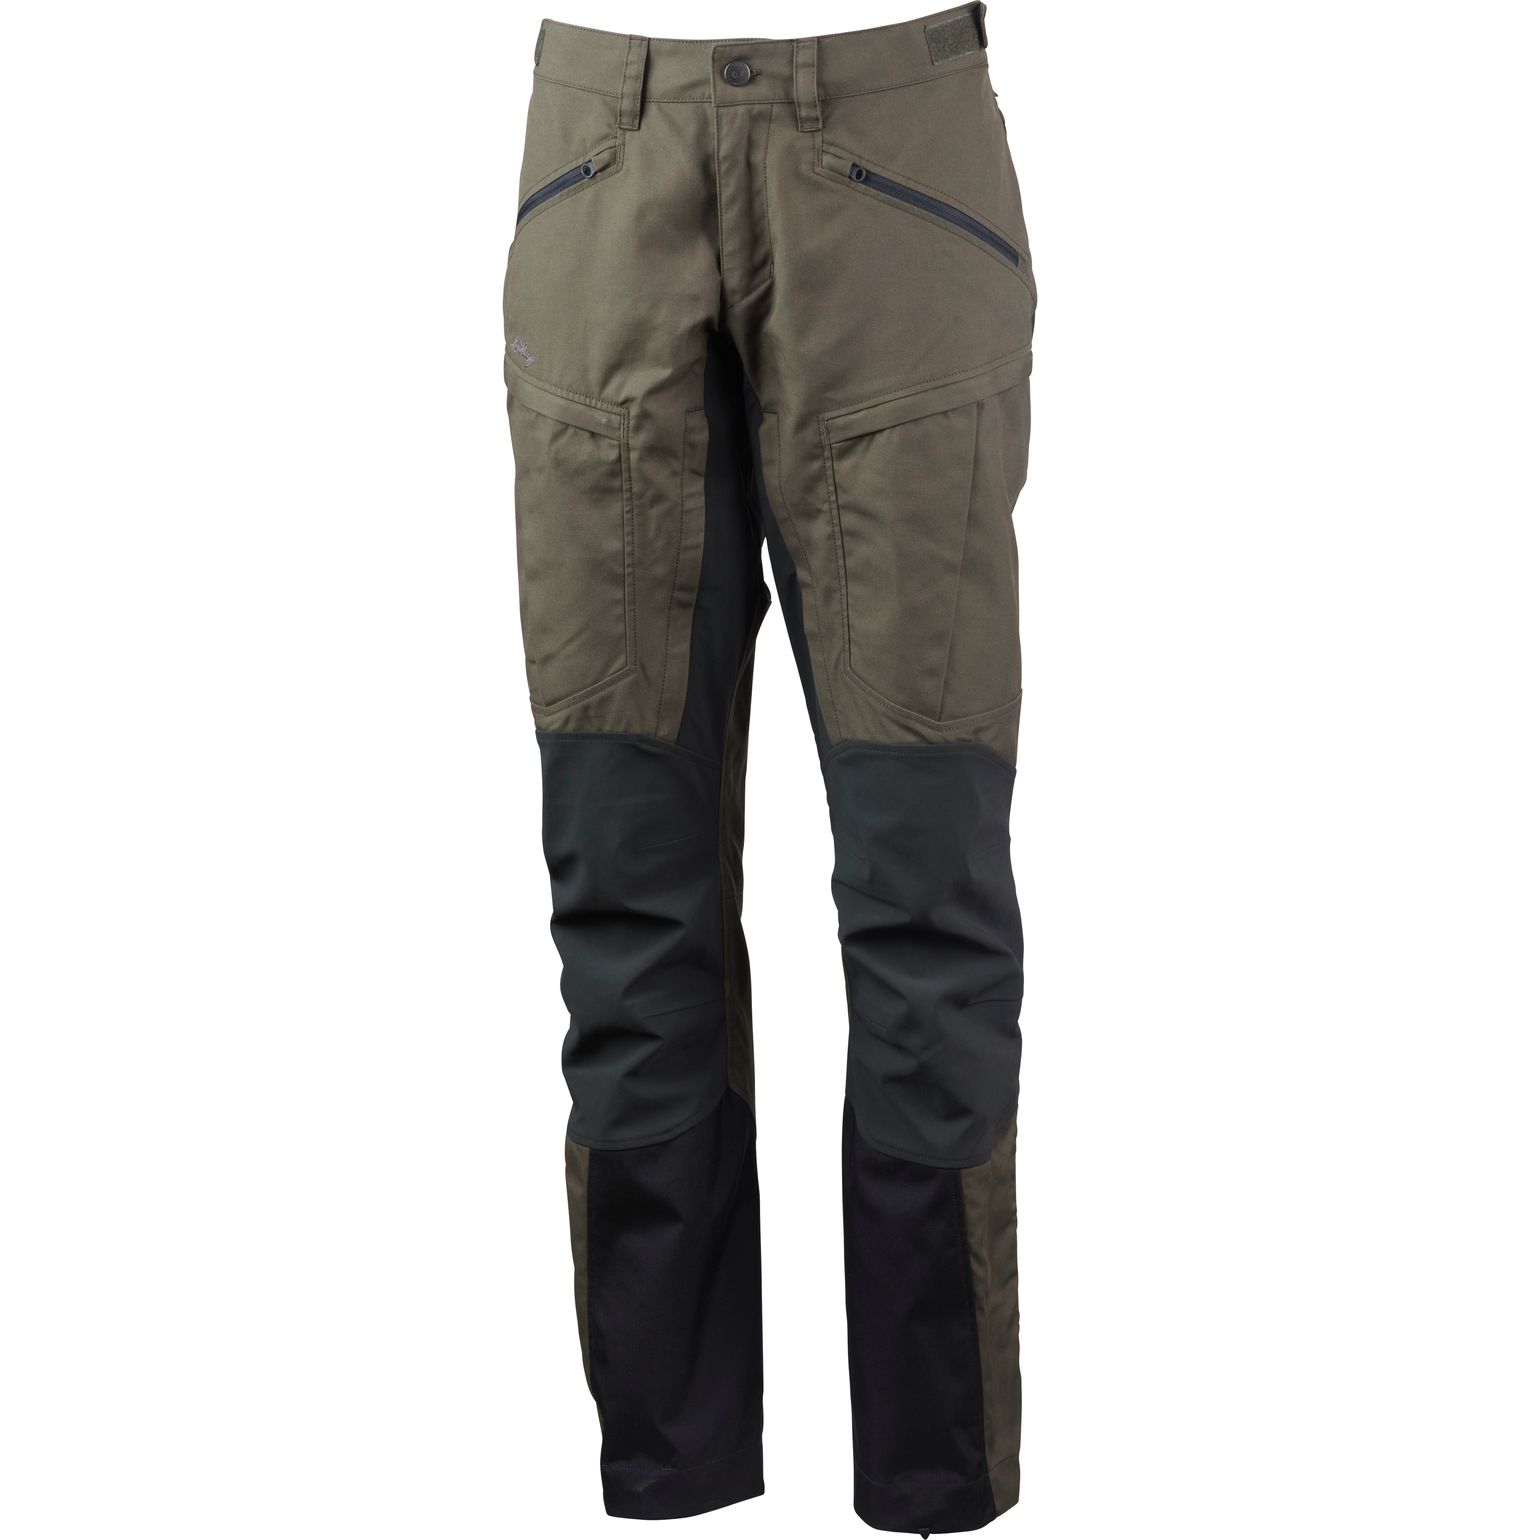 Lundhags Women's Makke Pro Pant Forest Green/Charcoal